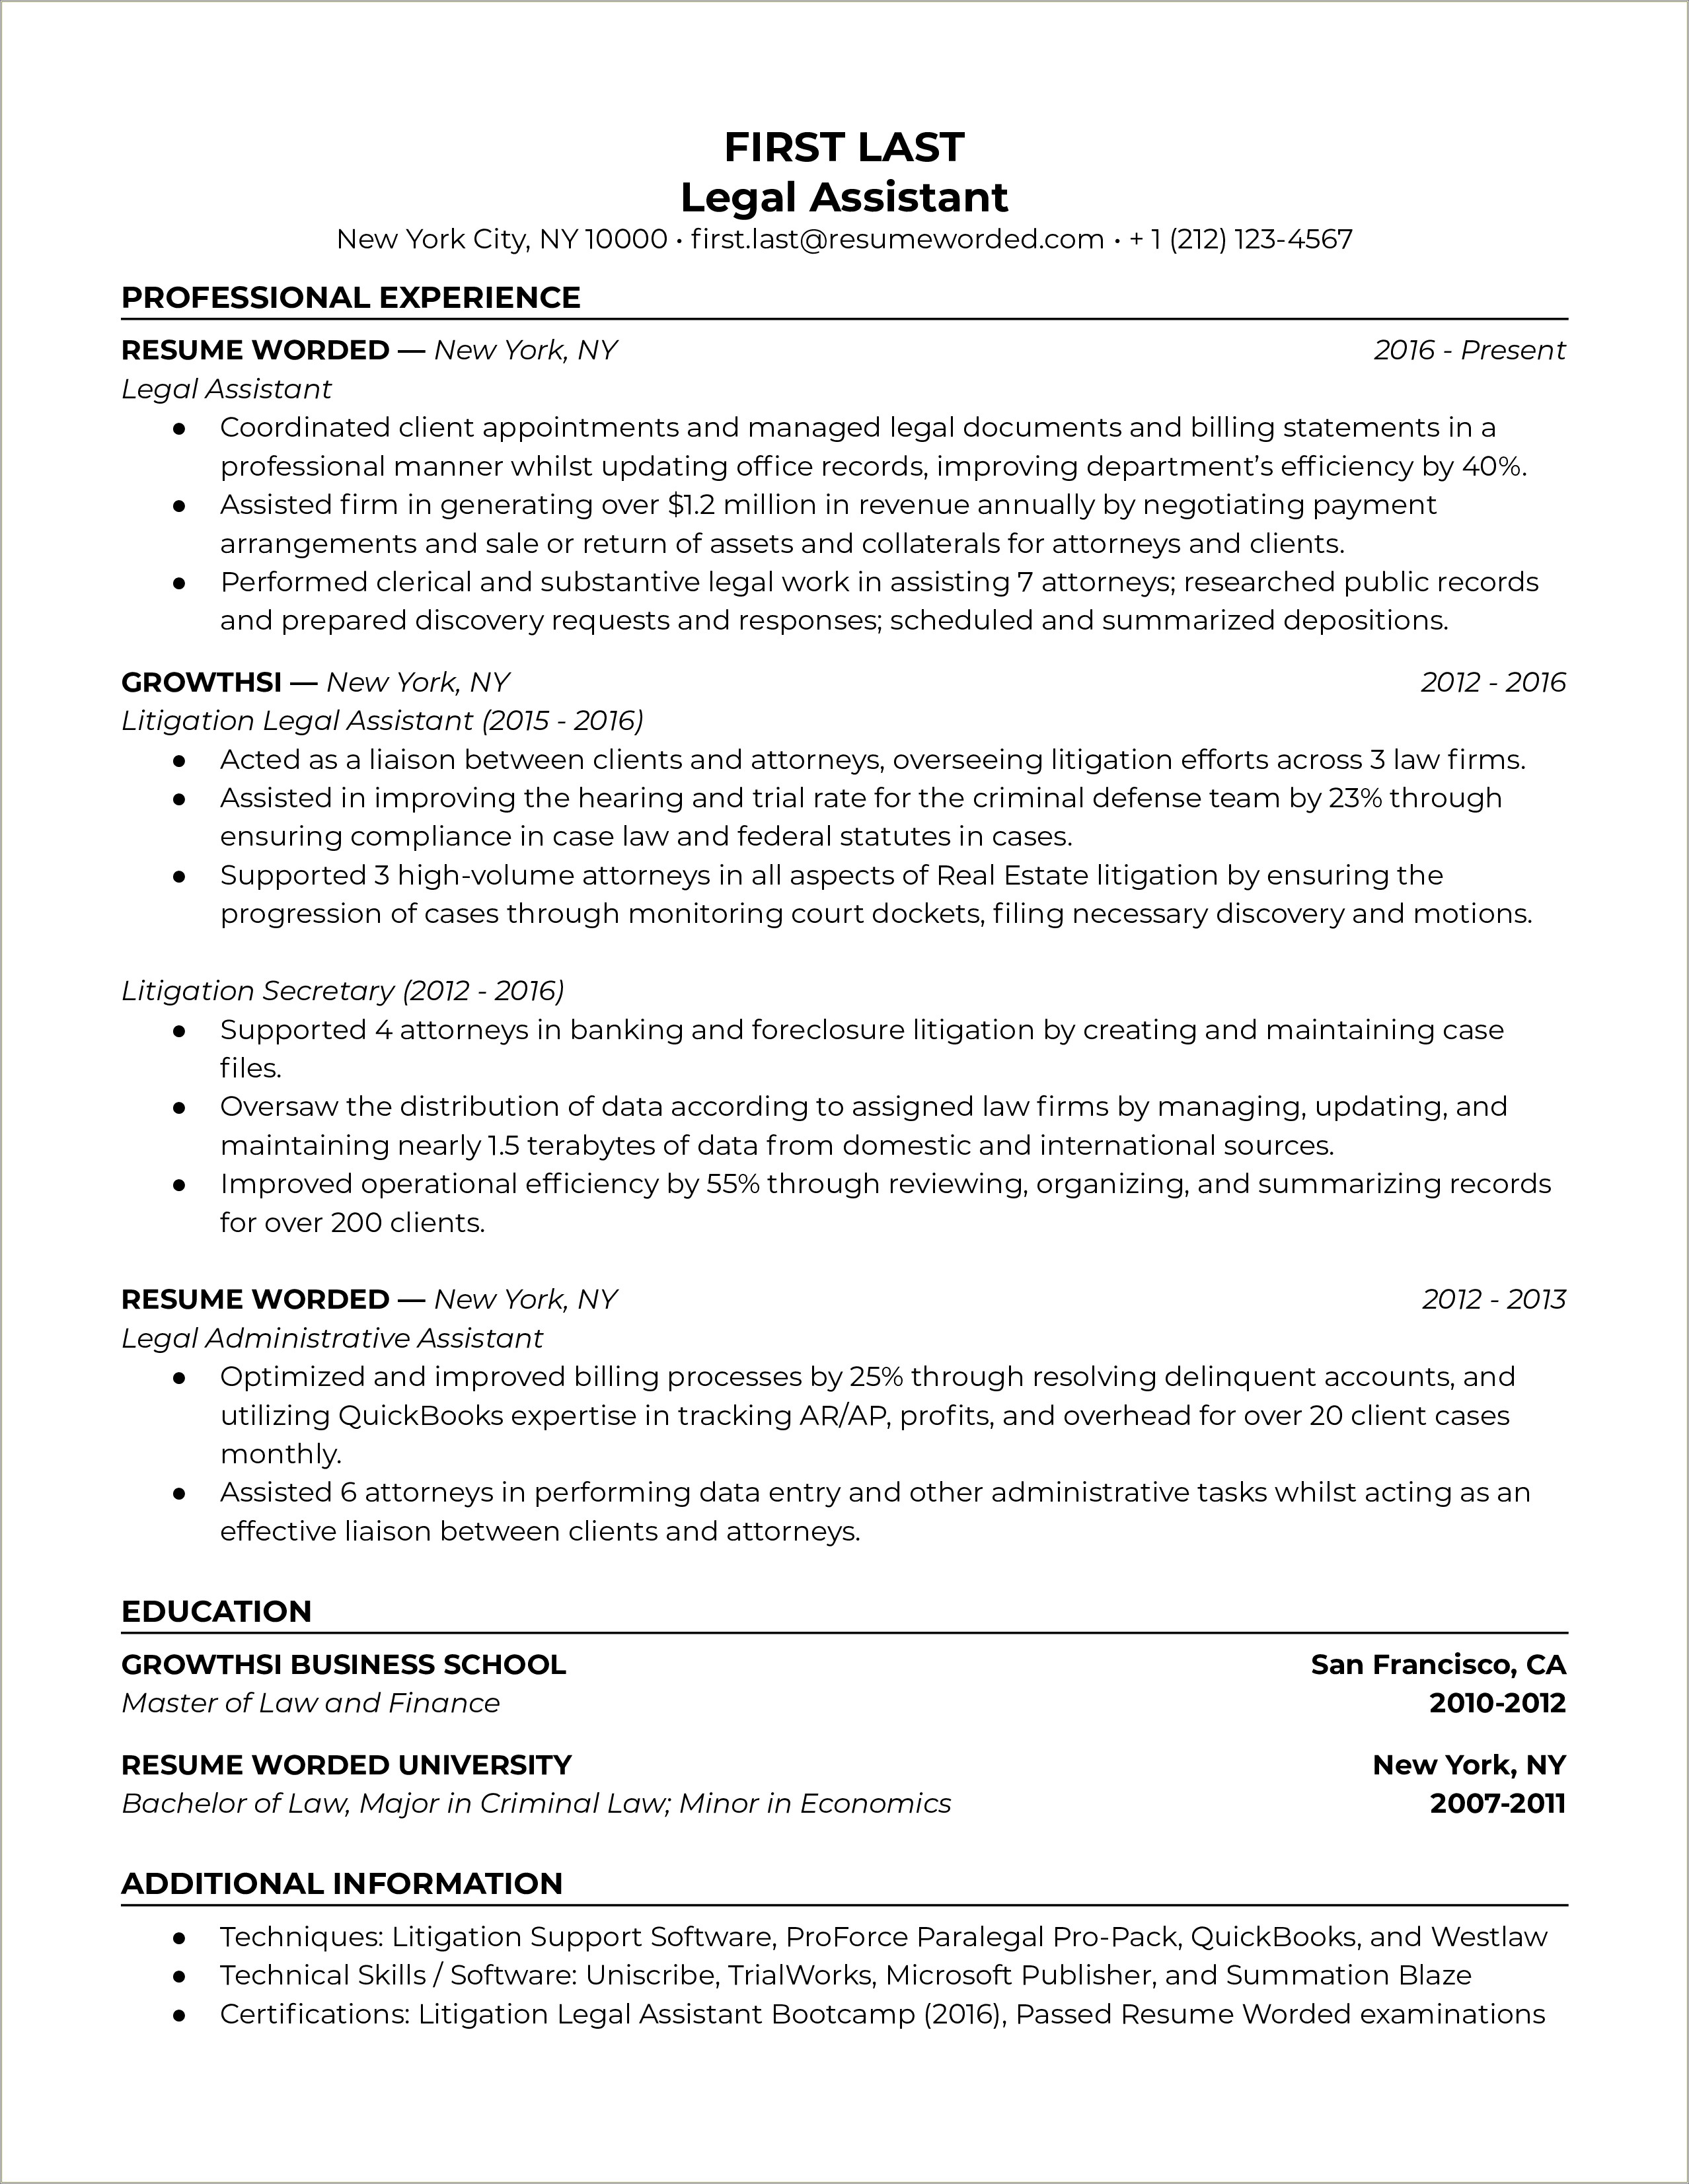 Sample Resume For Legal Assistant With No Experience